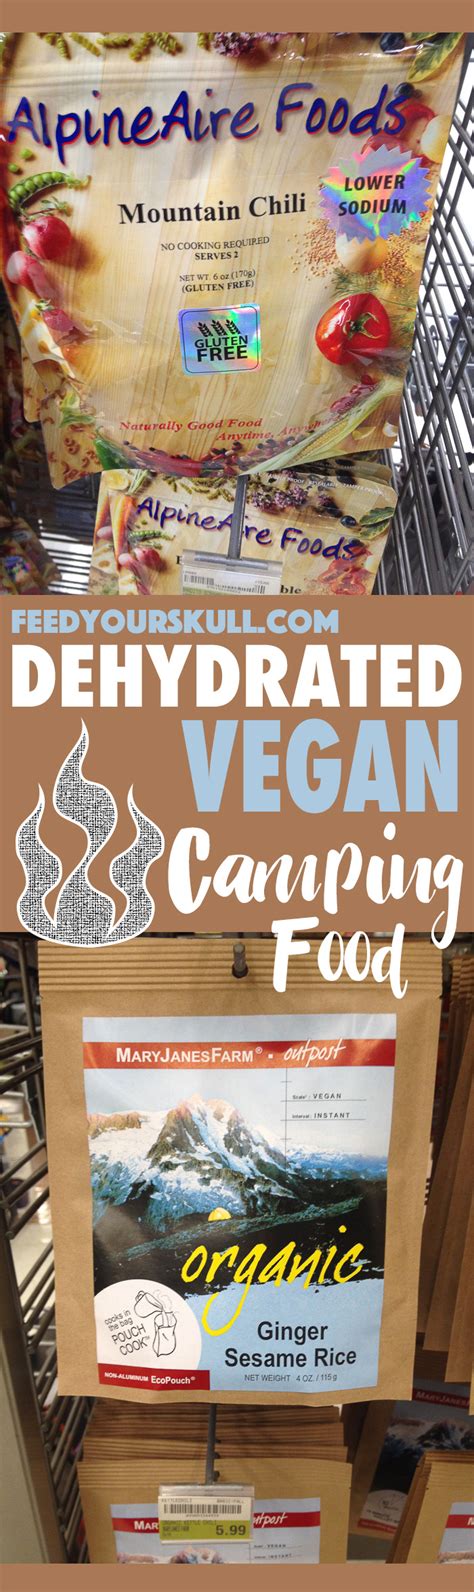 Looking for the best vegan camping food for your next adventure? Top 5 Options for Dehydrated Vegan Camping Food